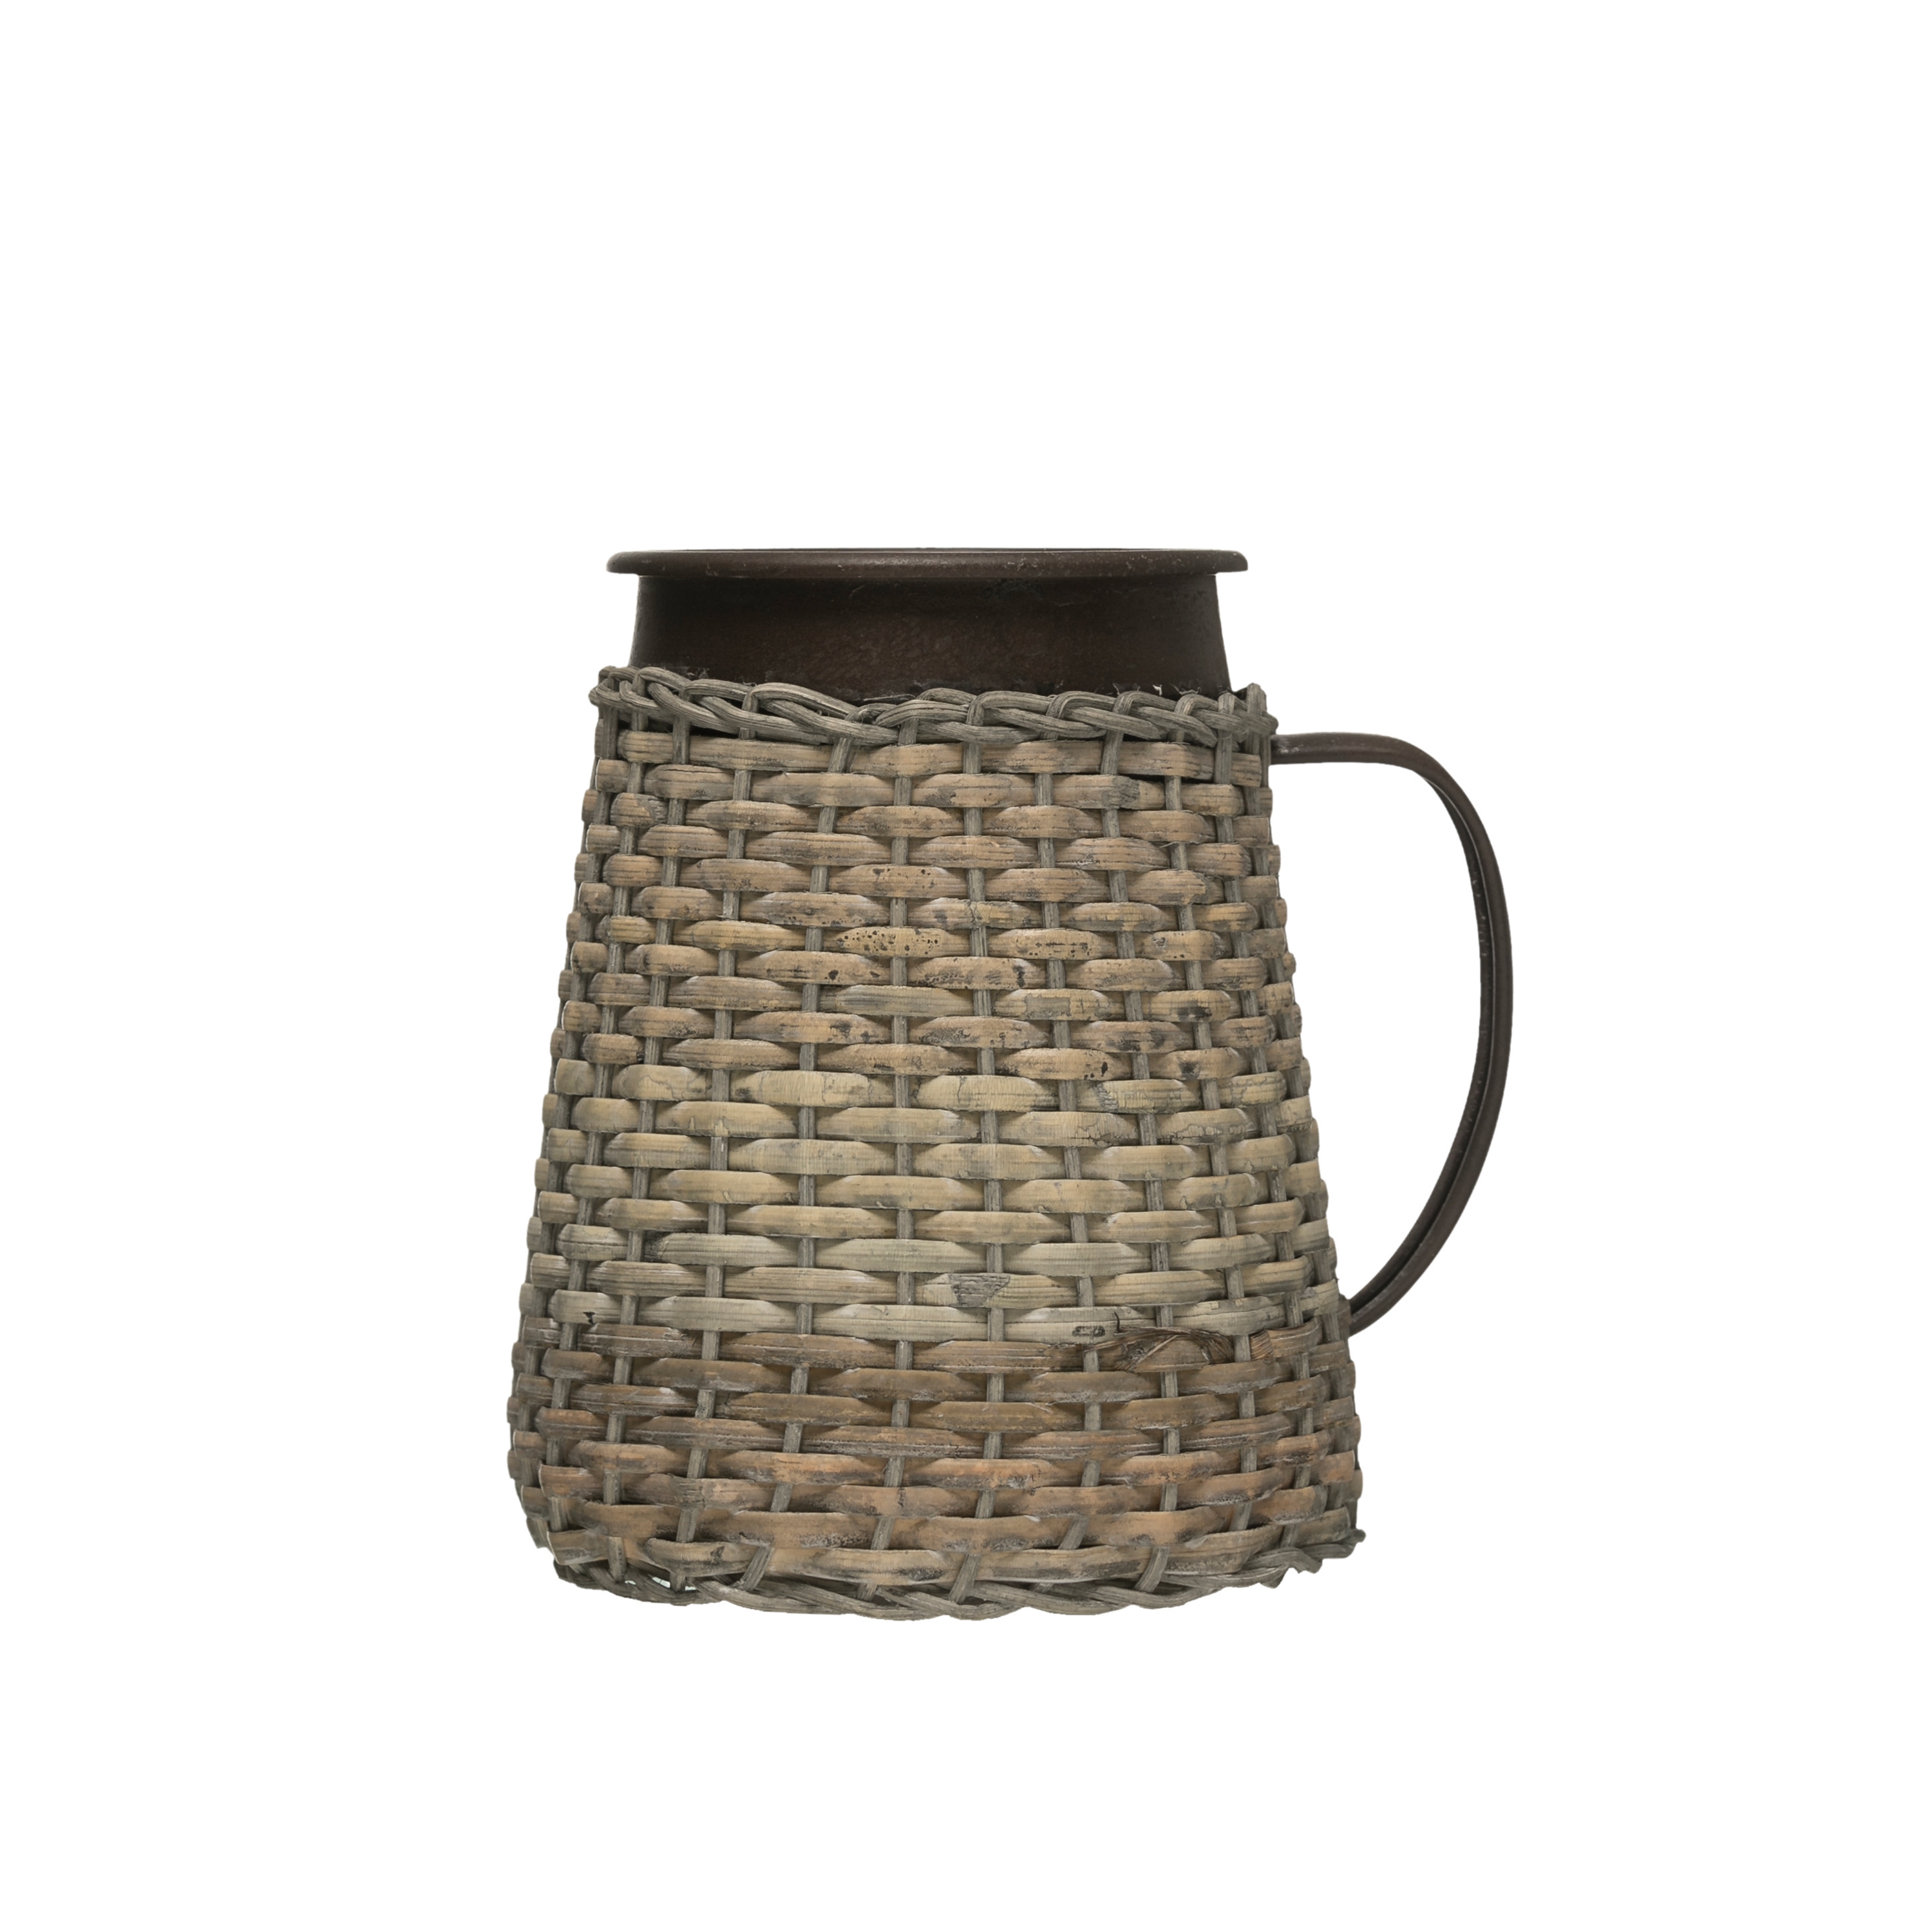 7"H Decorative Metal Pitcher with Woven Rattan Sleeve - Image 0